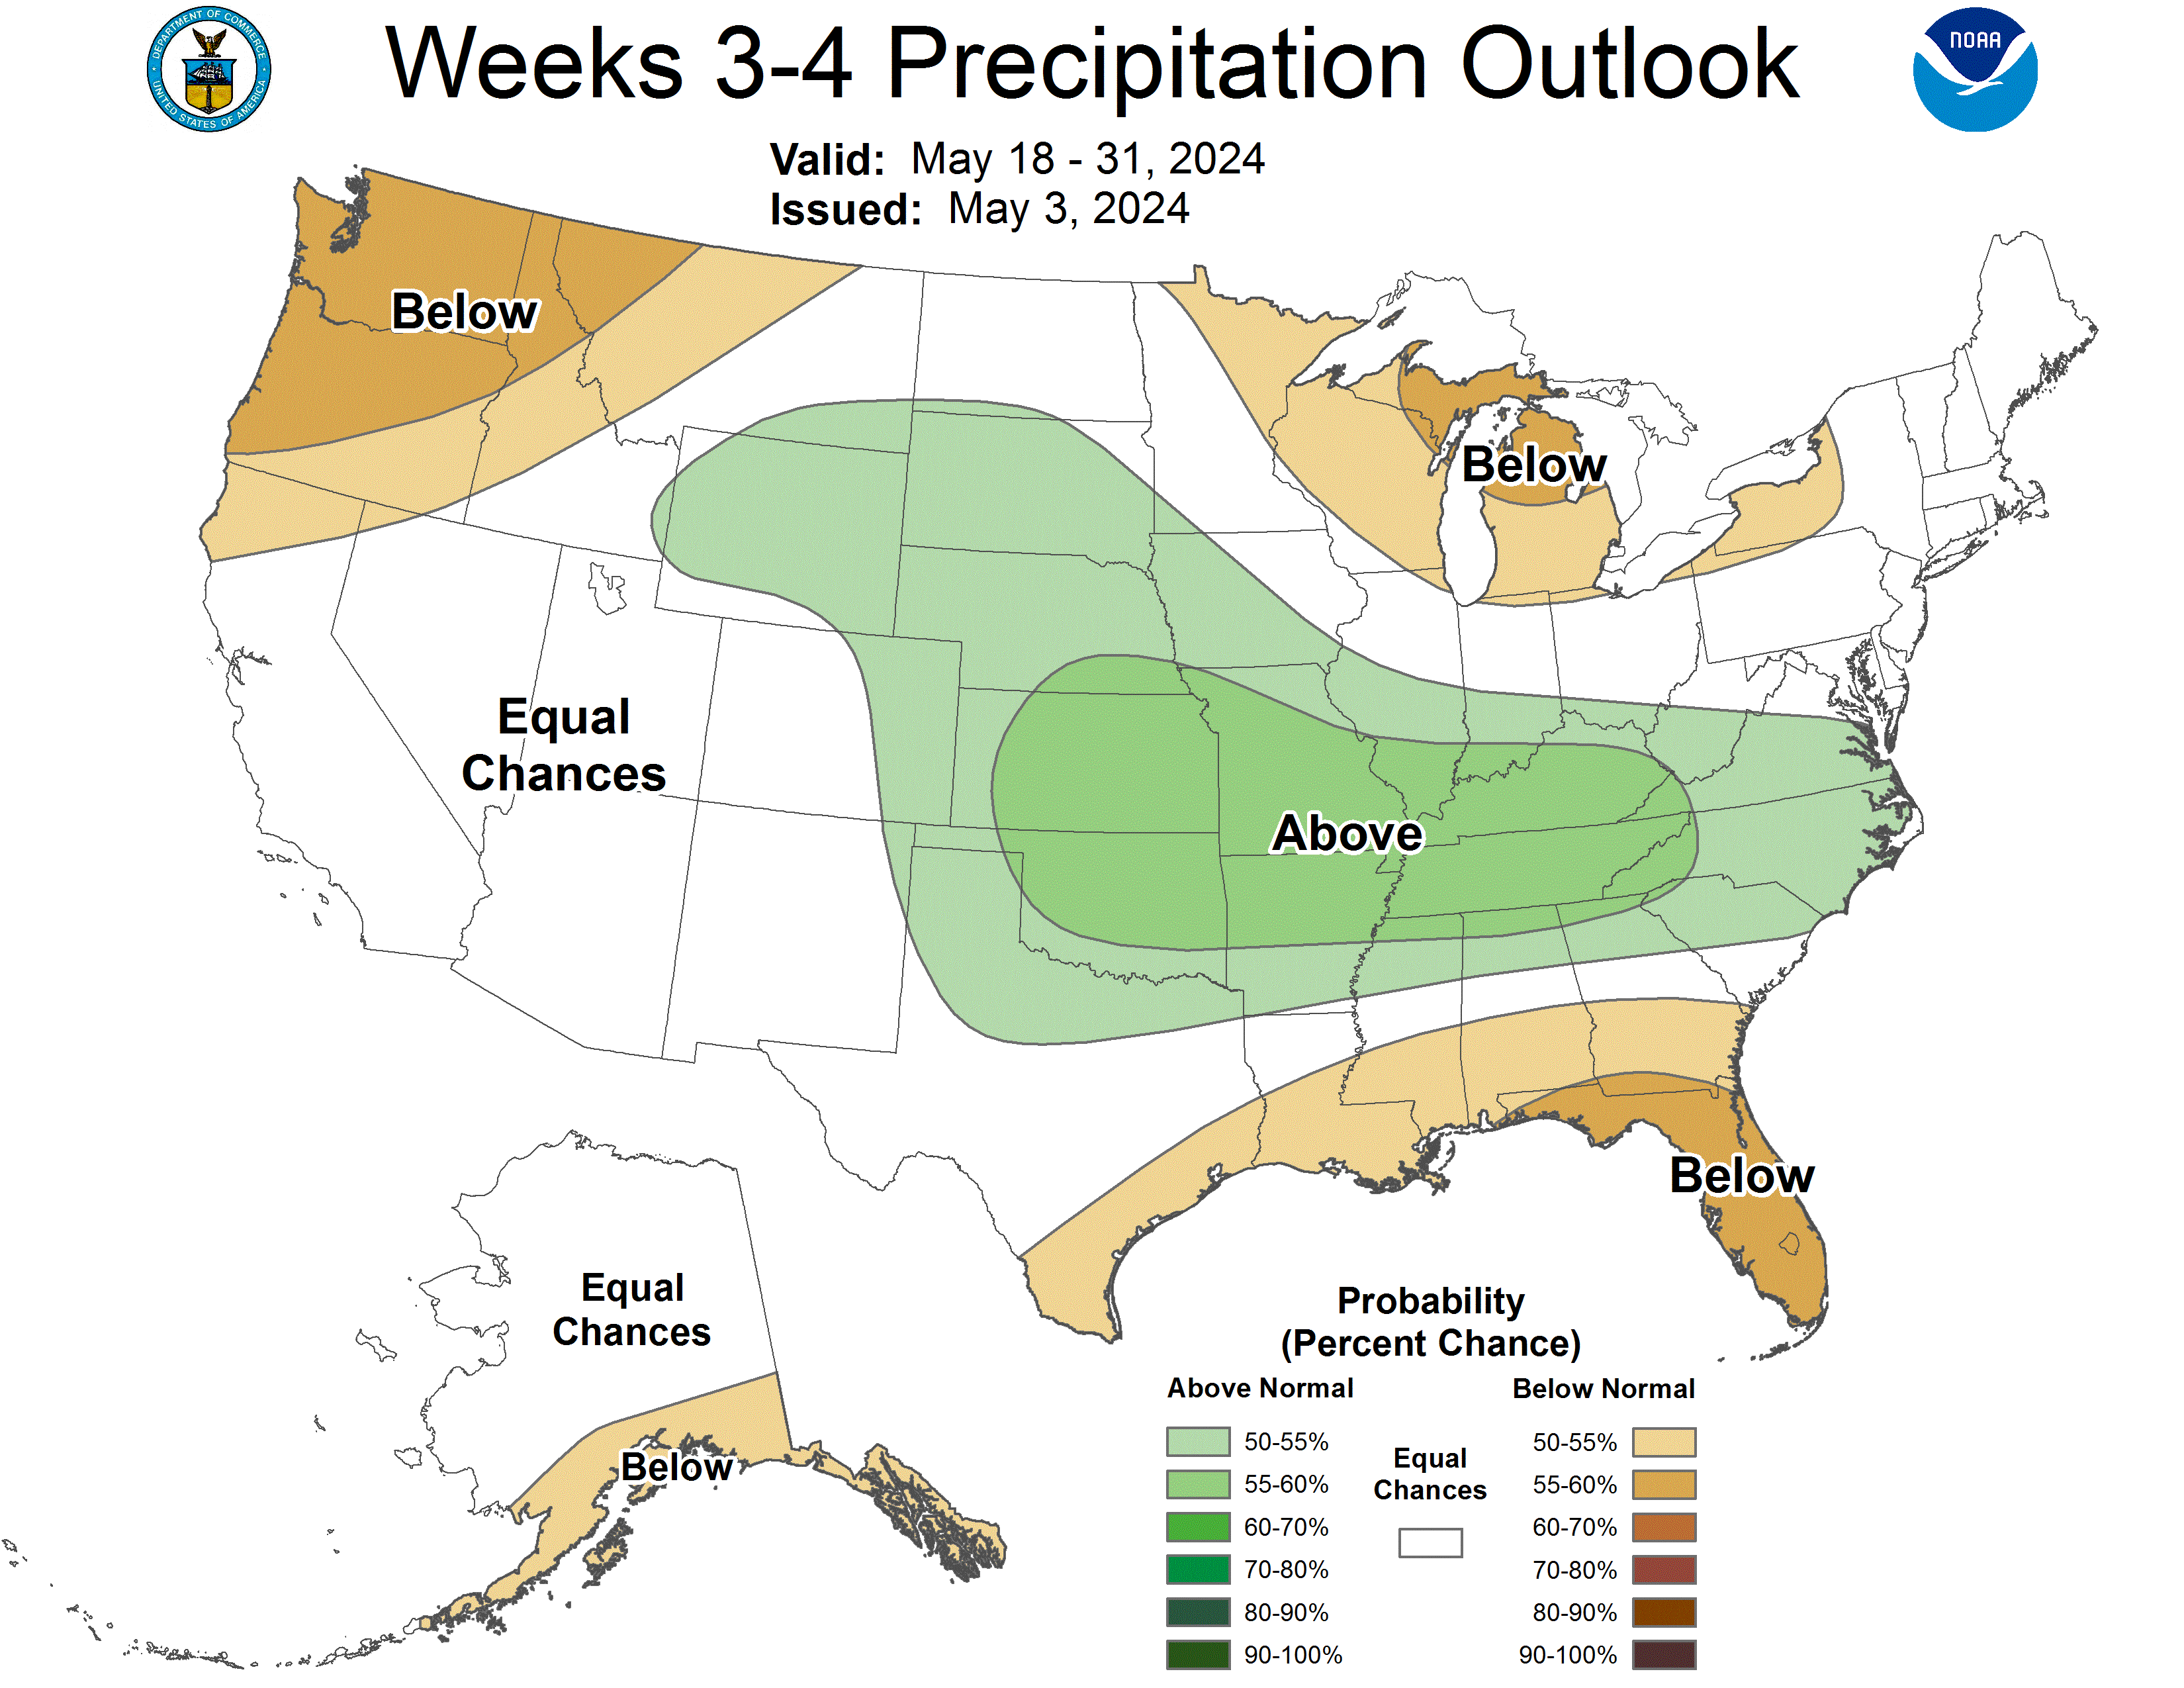 Latest Week 3-4 Precipitation Outlook graphic